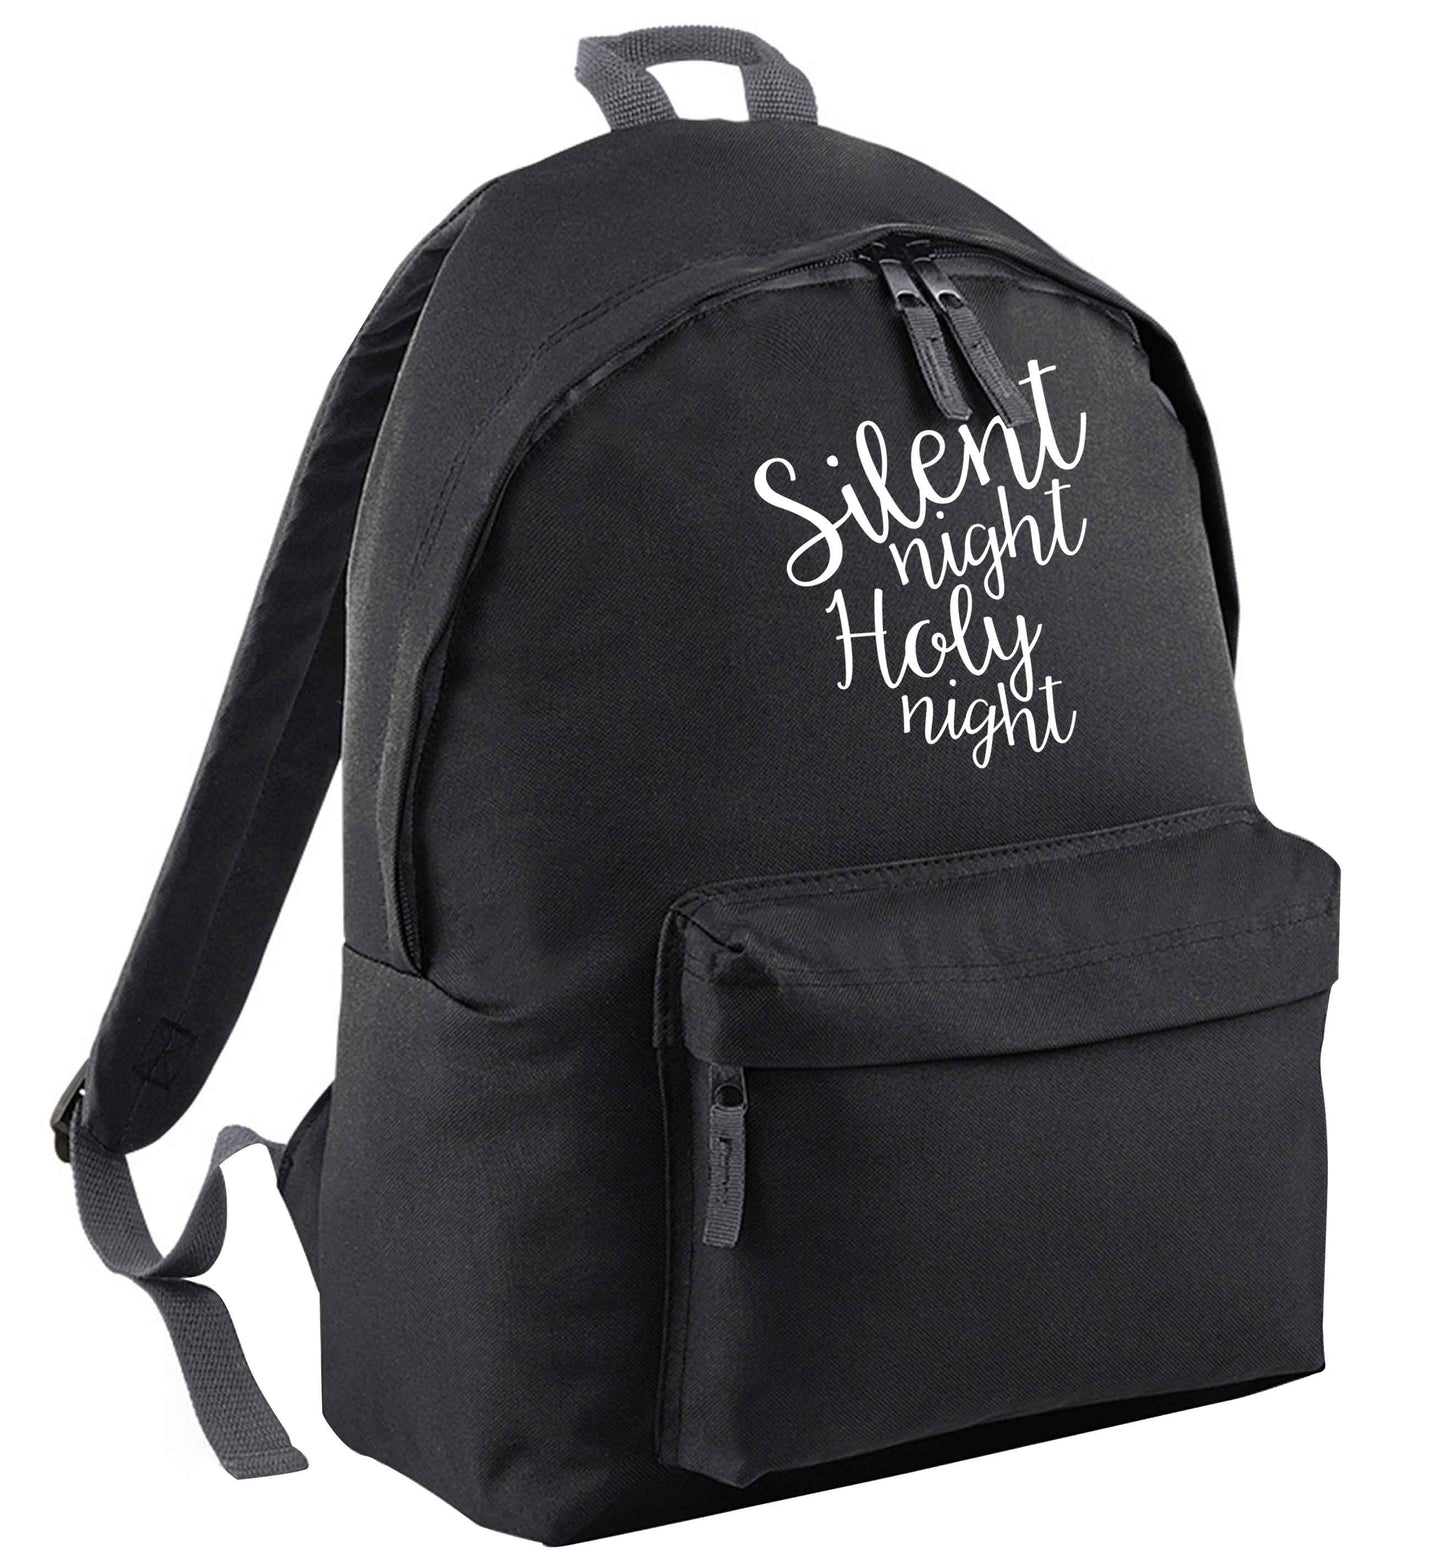 Silent night holy night black adults backpack